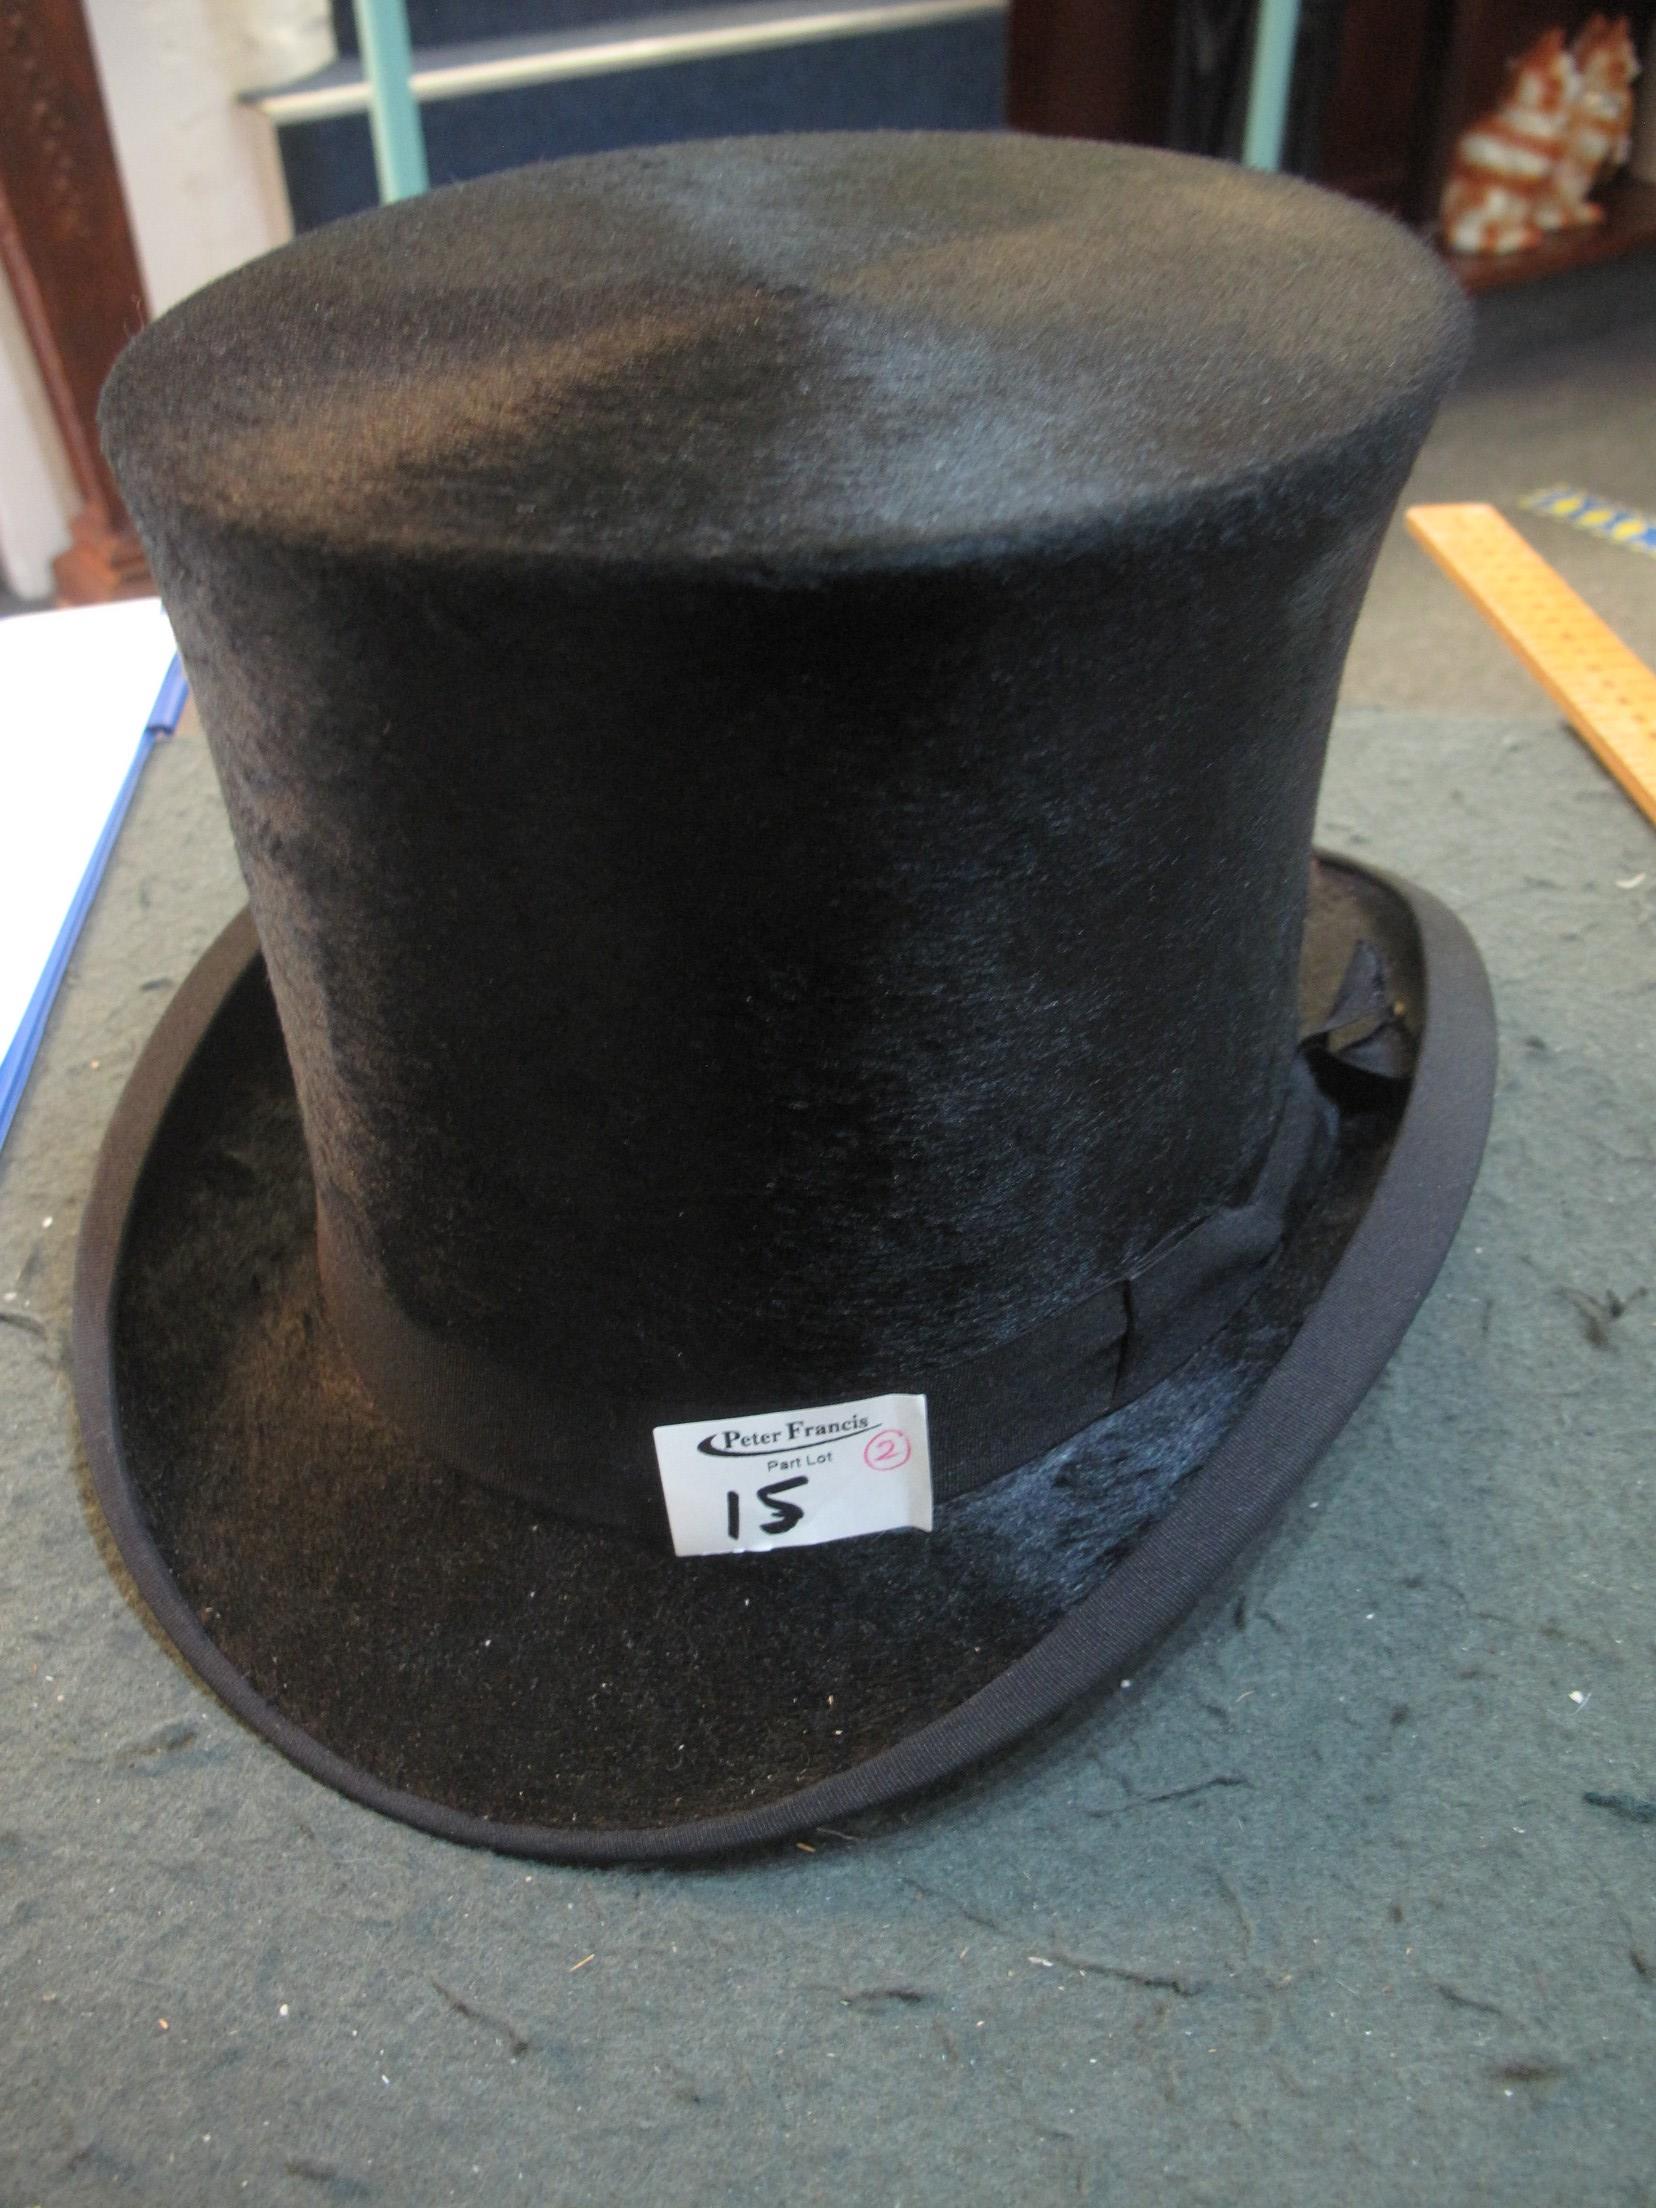 Christys' of London vintage top hat in original card box with printed labels (B.P. 21% + VAT). - Image 3 of 4